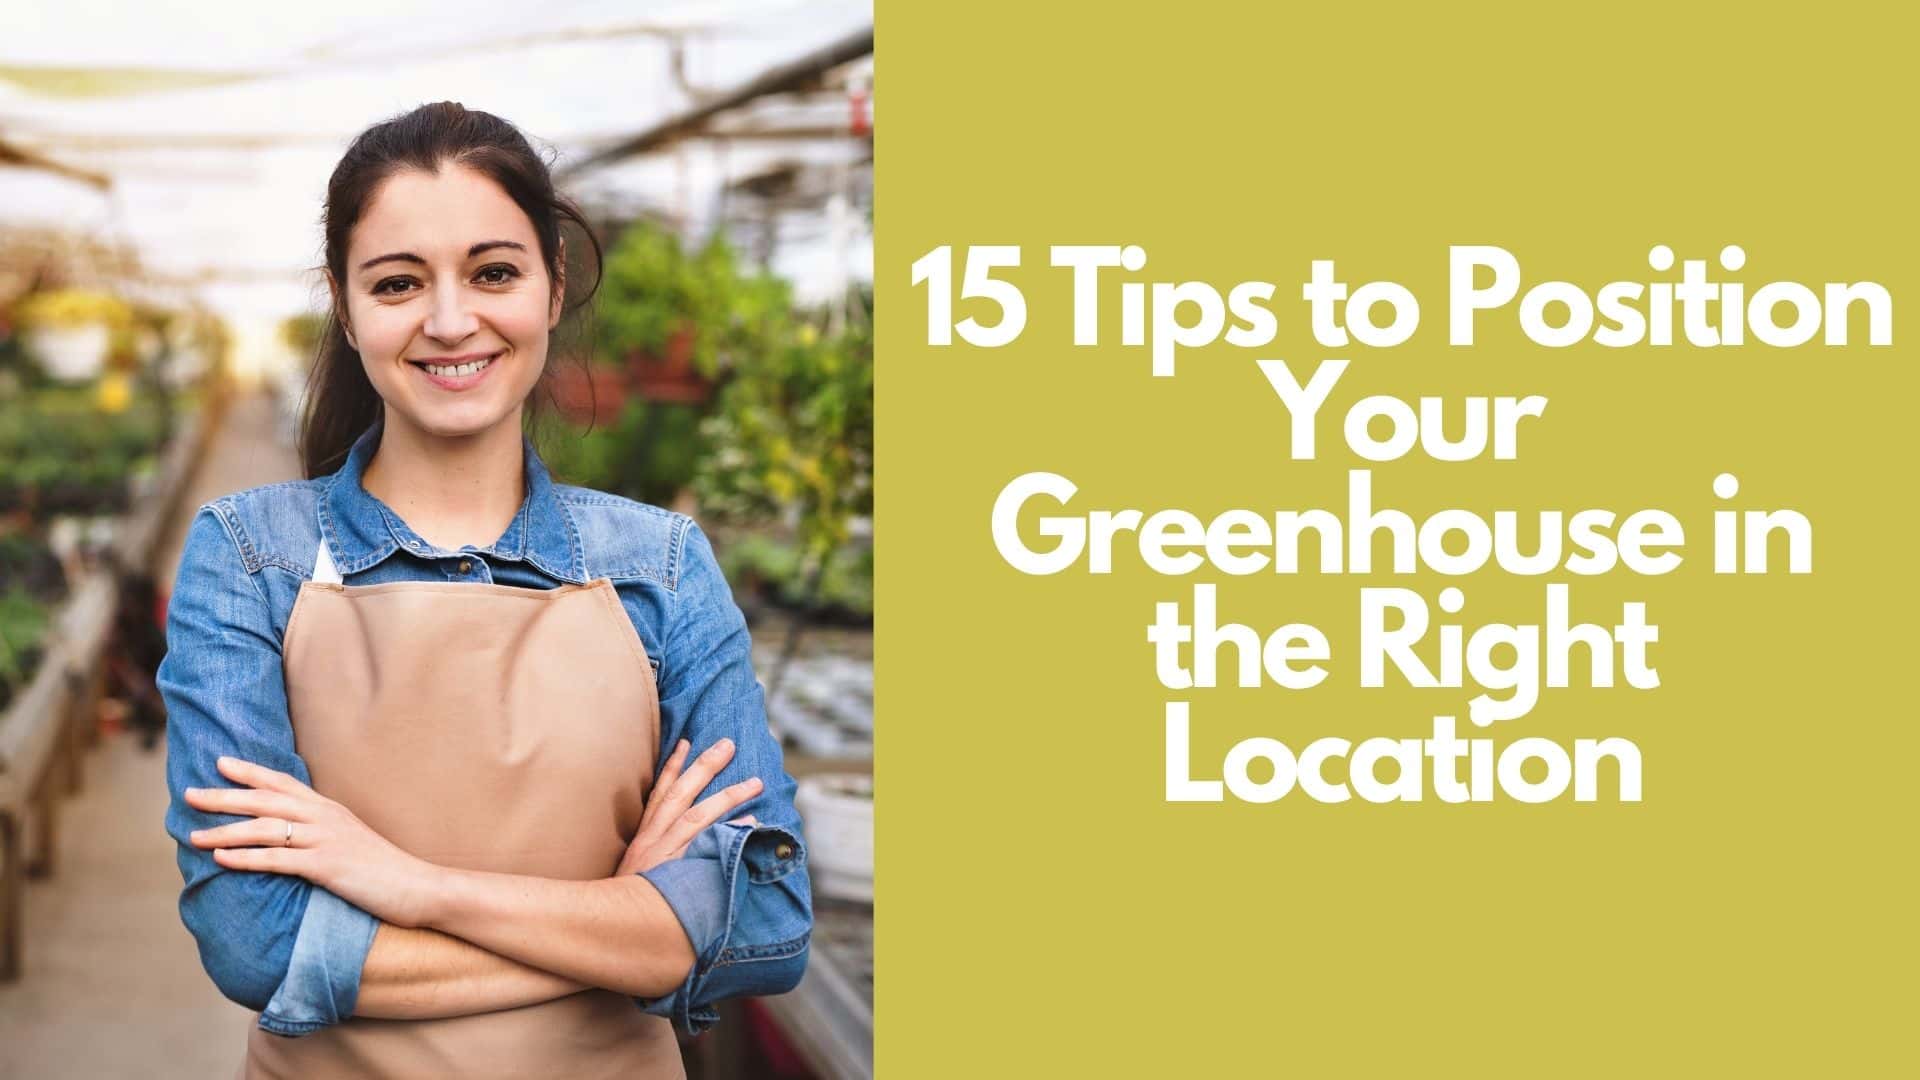 15 Tips to Position Your Greenhouse in the Right Location